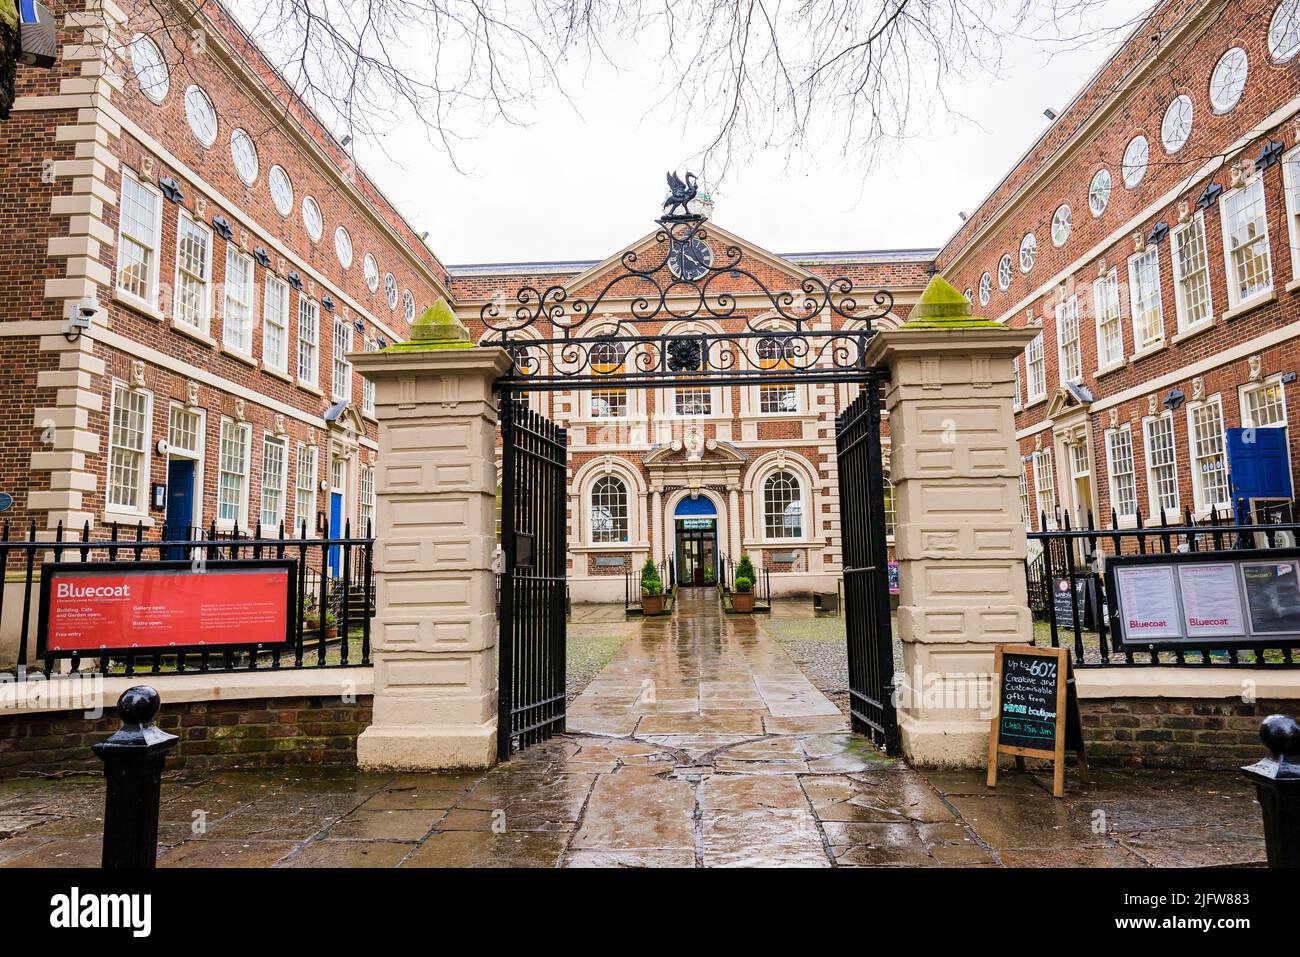 Built in 1716–17 as a charity school, Bluecoat Chambers in School Lane is the oldest surviving building in central Liverpool, England, and the oldest Stock Photo